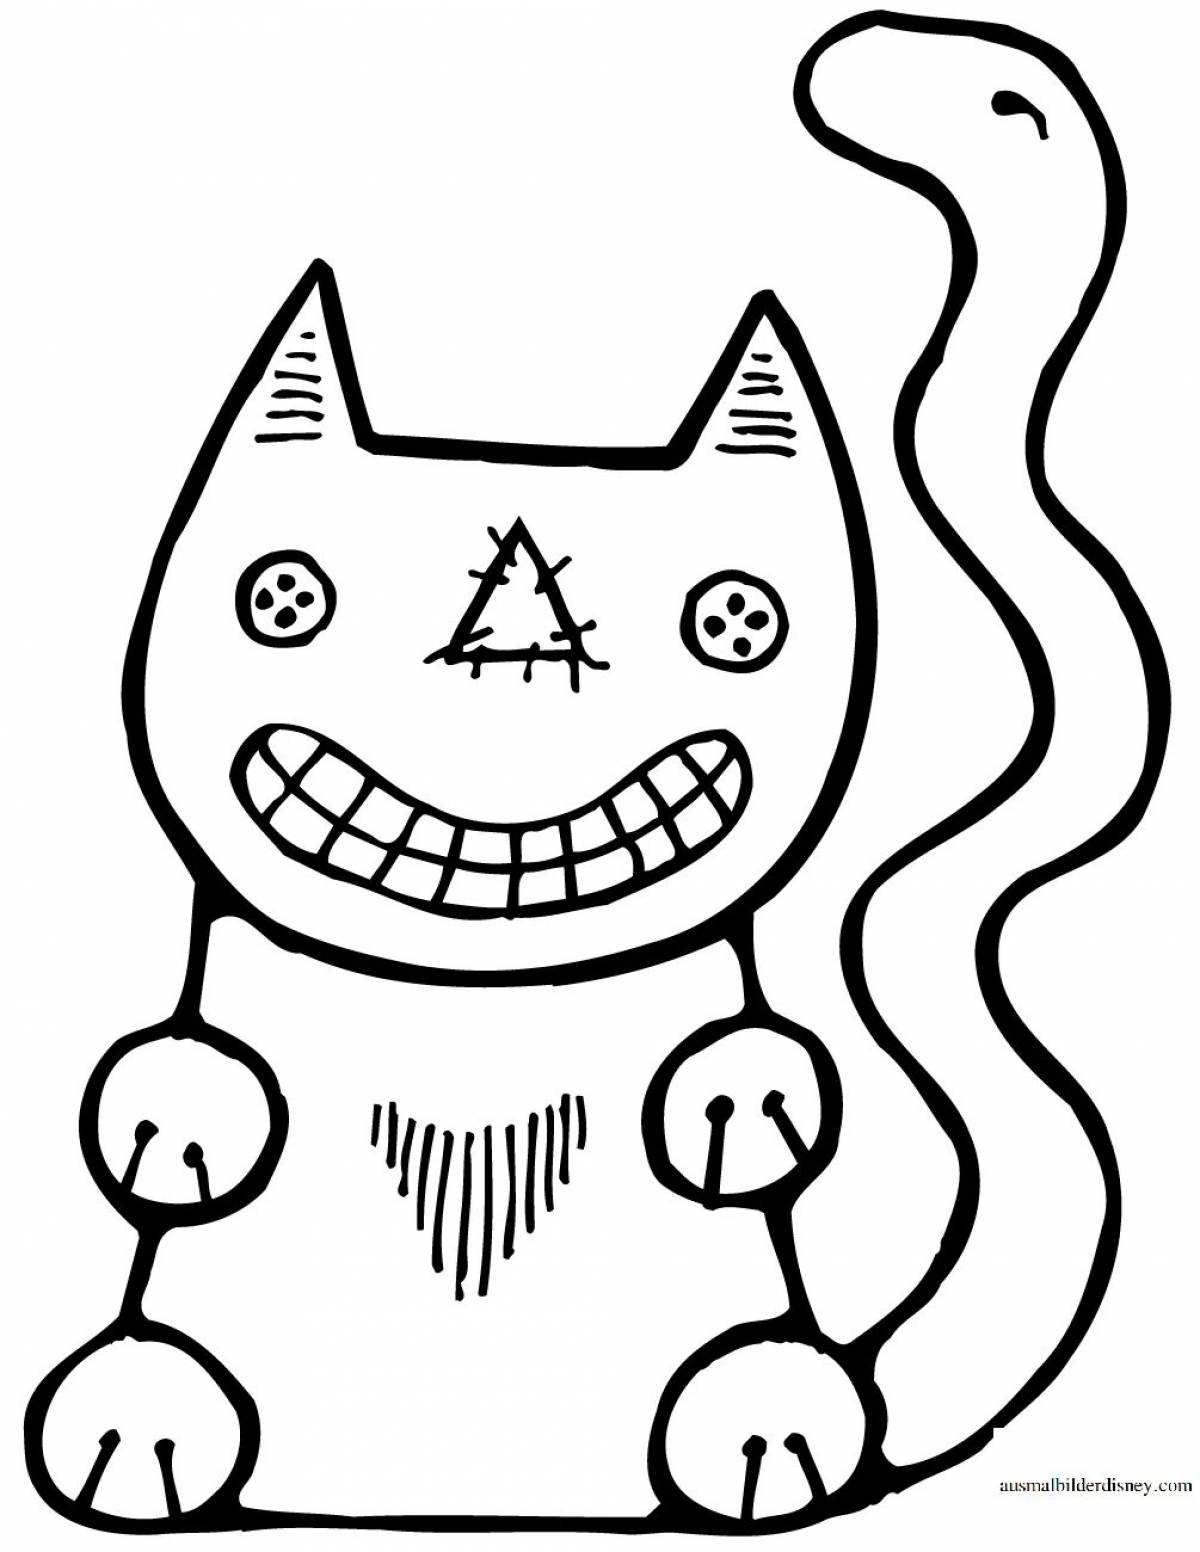 Sphynx cat with back tingling coloring page